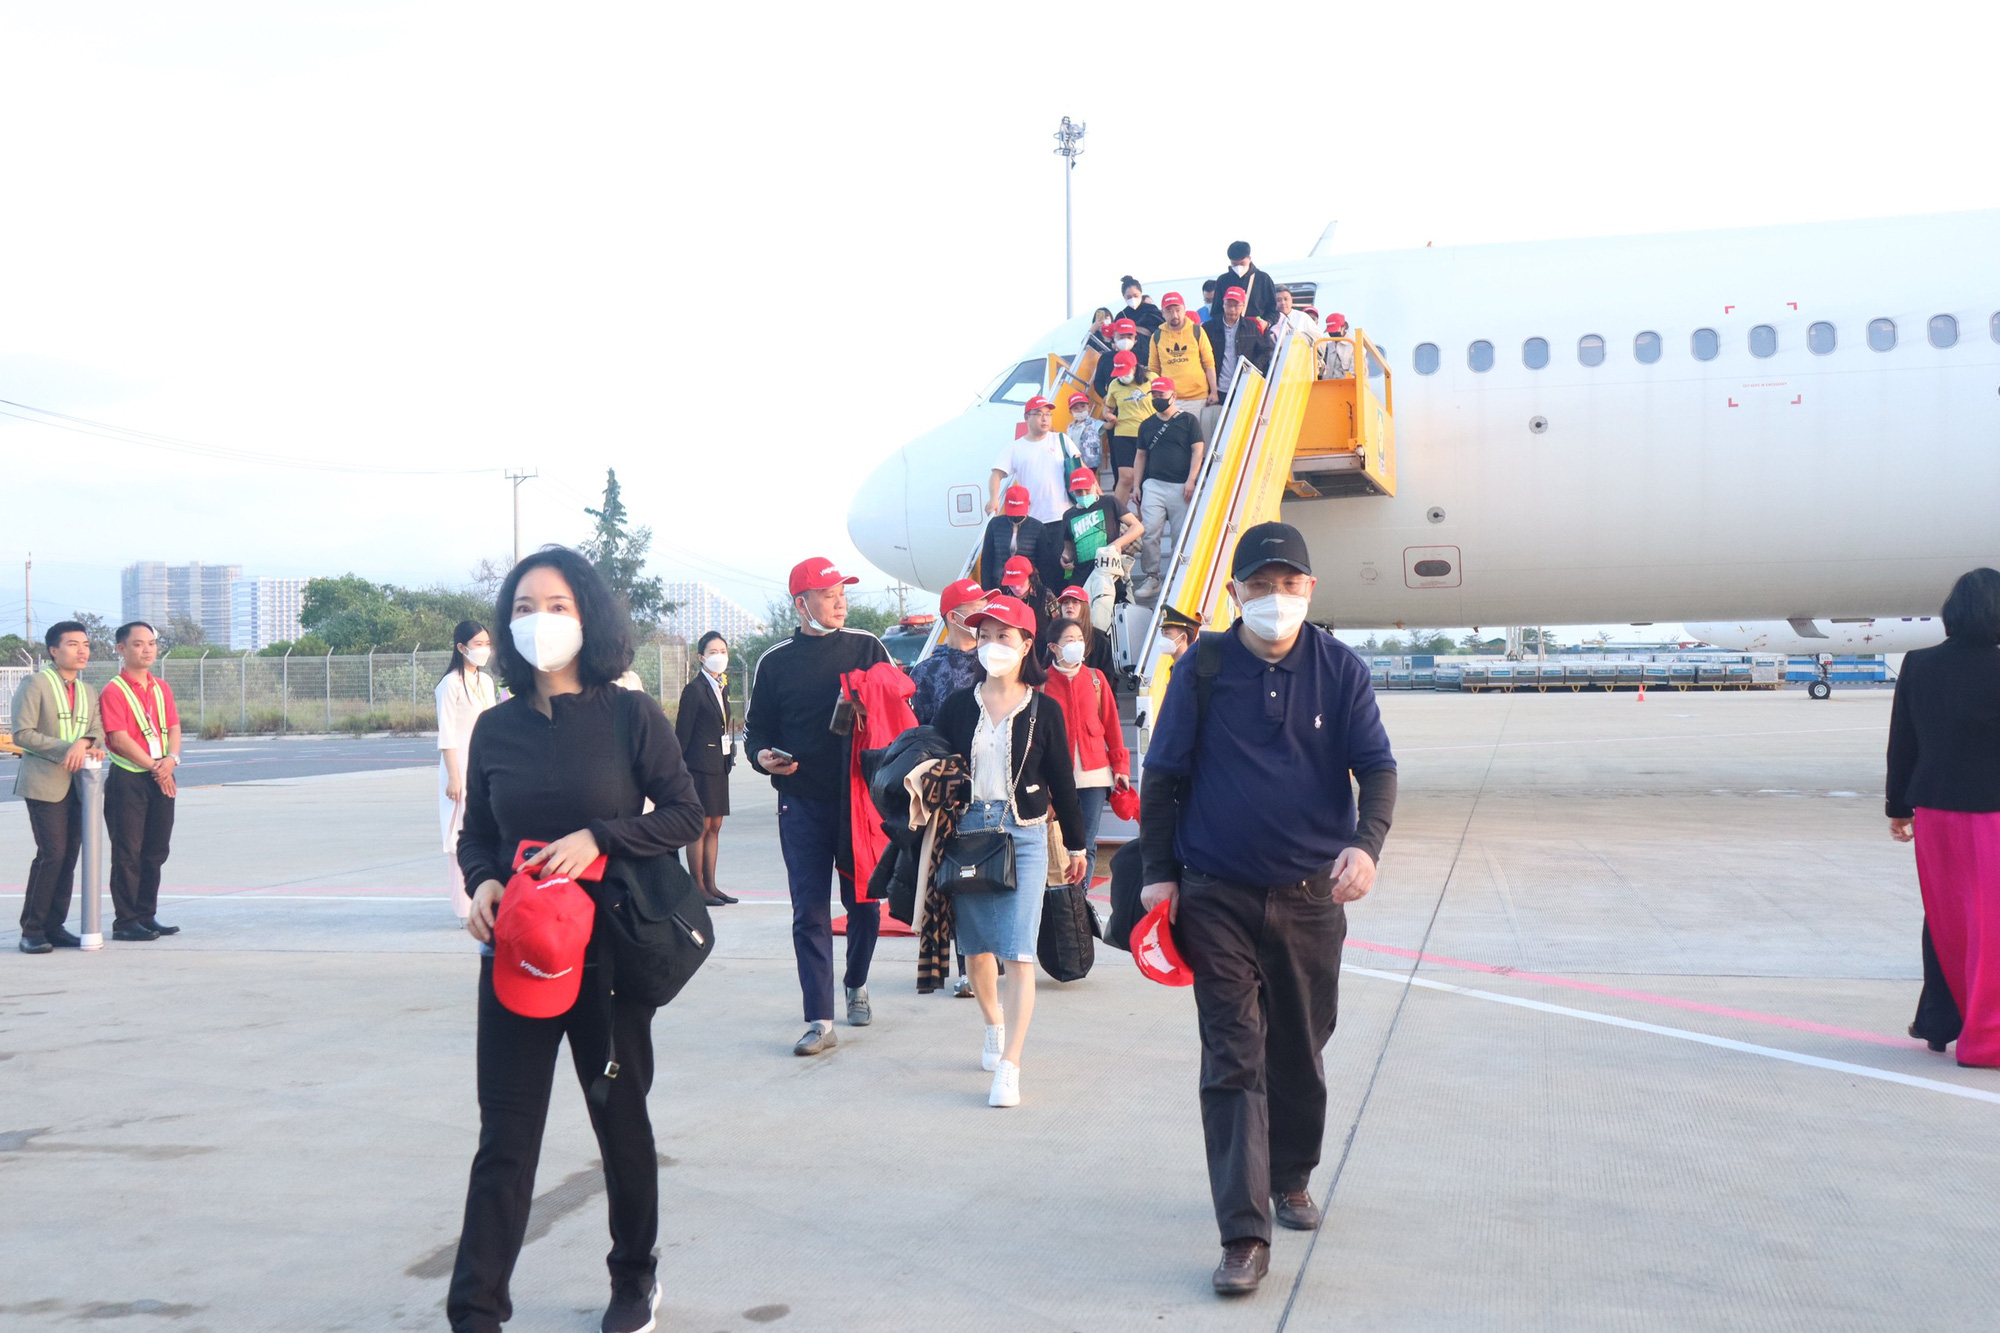 Chinese tourists arrive in Khanh Hoa Province, Vietnam, January 23, 2022. Photo: Thuc Nghi / Tuoi Tre